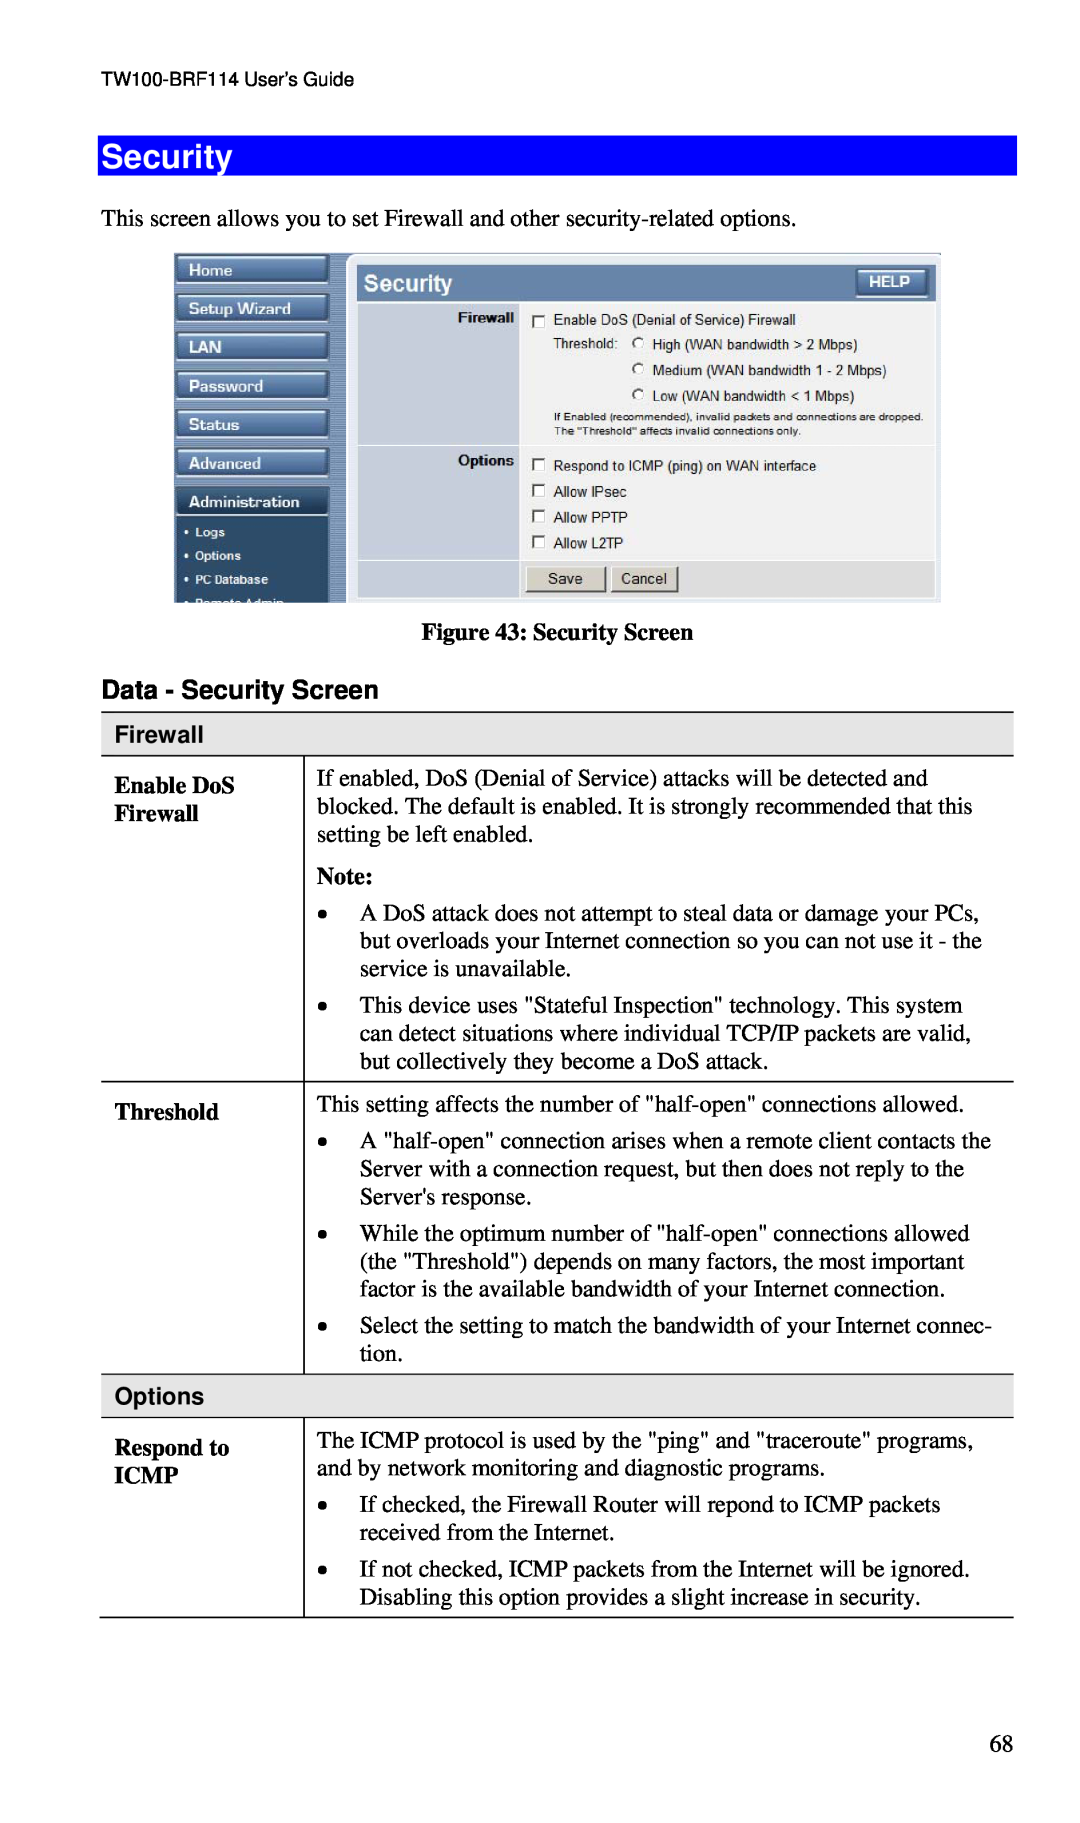 TRENDnet BRF114 manual Security Screen, Firewall, Enable DoS, Threshold, Options, Respond to, Icmp 